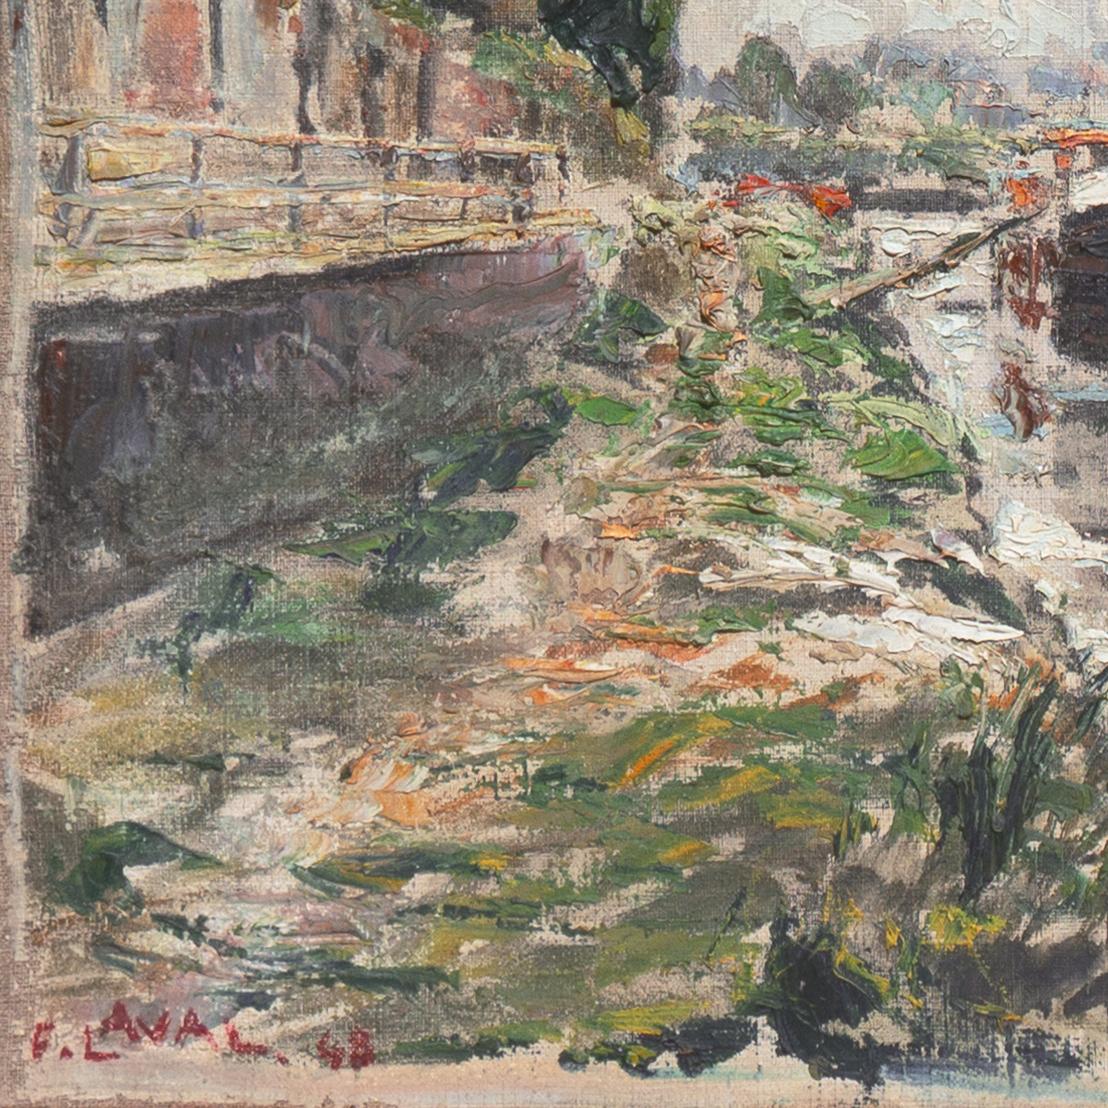 Signed lower left, 'F. Laval' for Fernand Laval (French, 1886-1966) and dated 1948. 

Born in Dordogne, Fernand Laval arrived in Paris at the age of 26 to study art and, during the early part of his career, painted beside Maurice Utrillo in